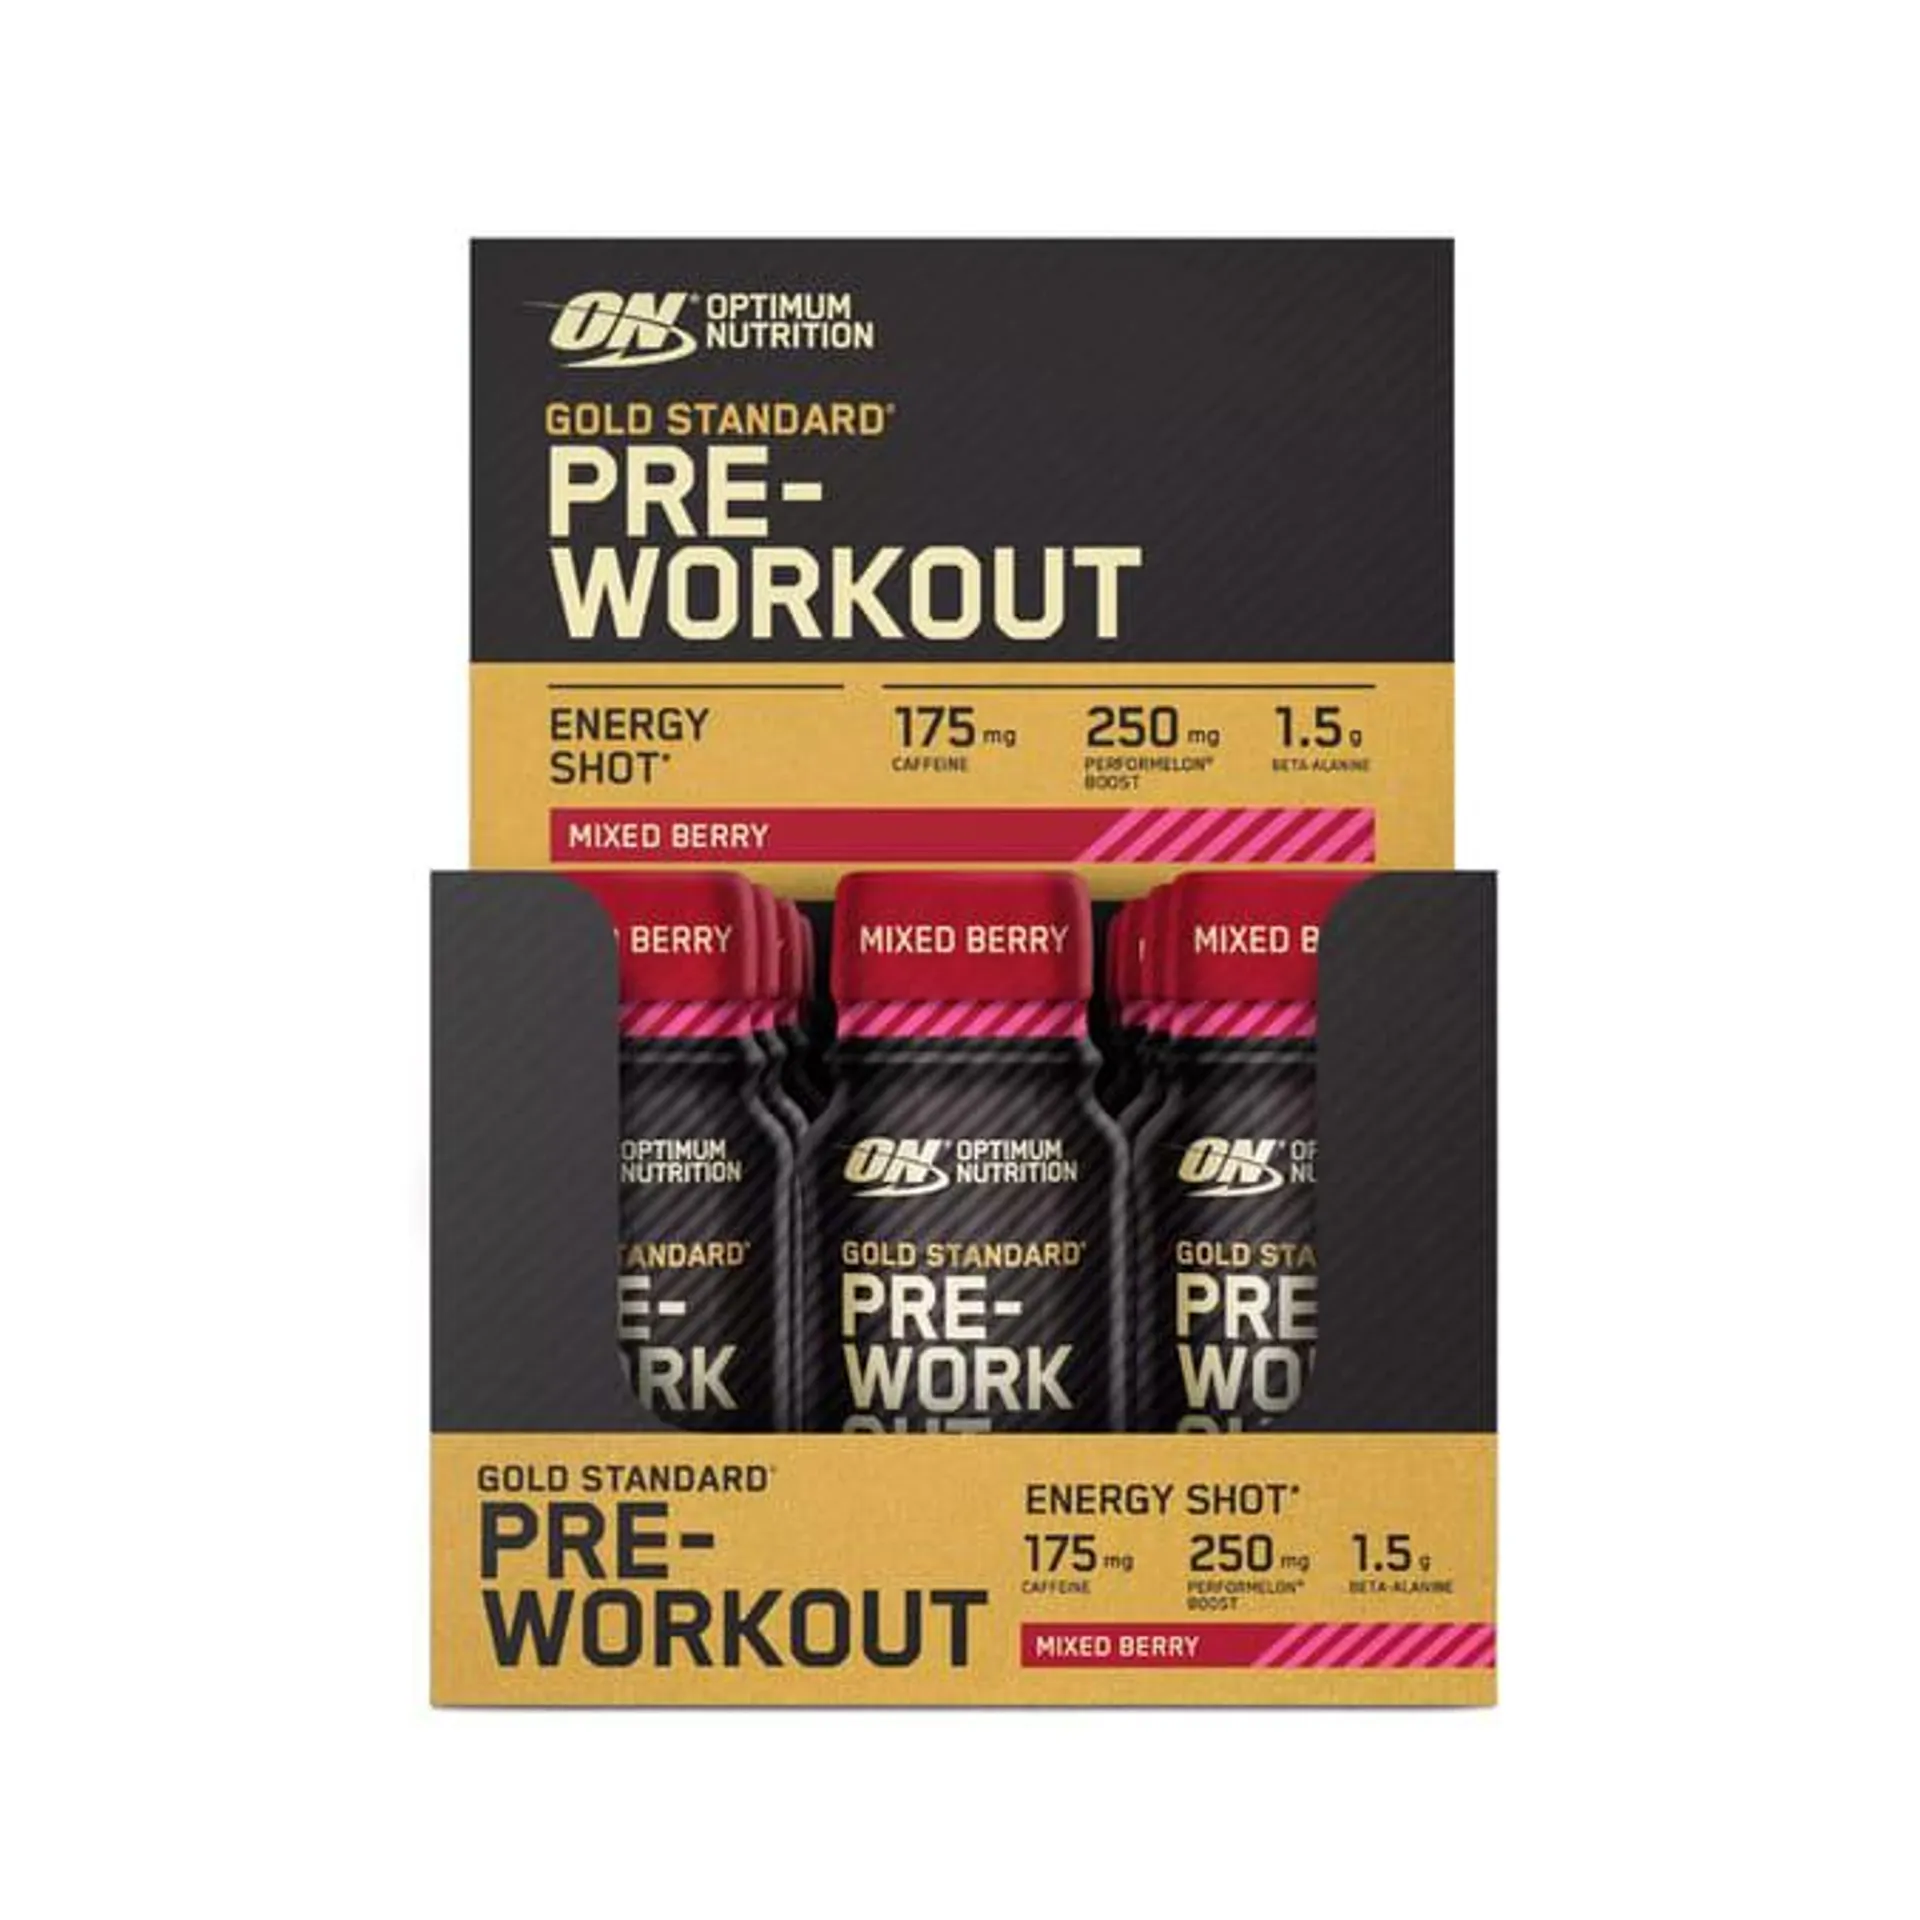 Optimum Nutrition: Gold Standard Pre-Workout Energy Shot 12 Pack - Mixed Berry